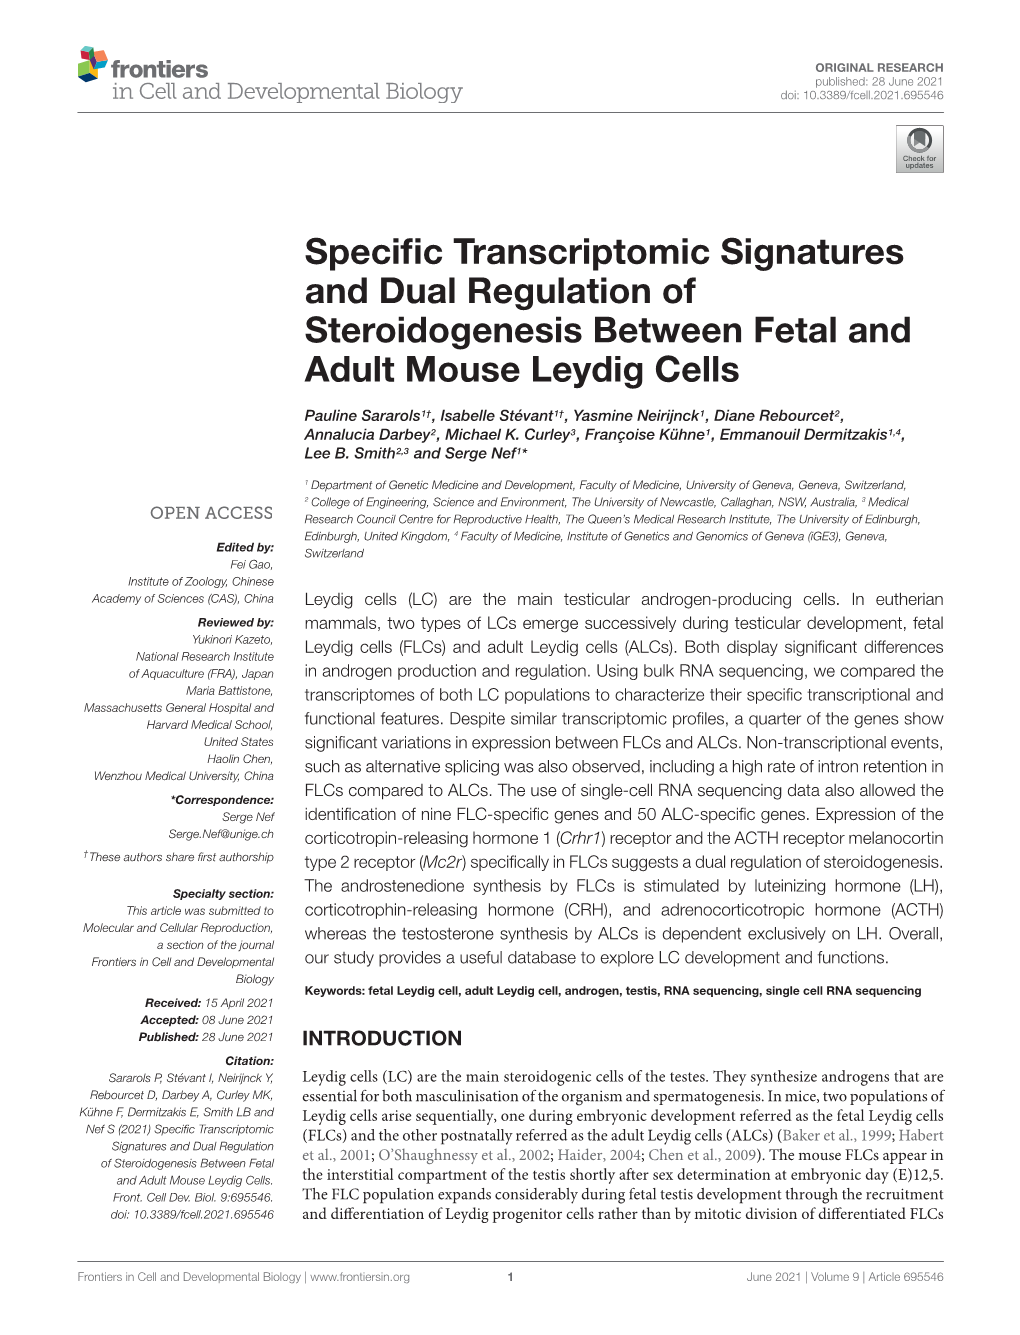 Specific Transcriptomic Signatures and Dual Regulation of Steroidogenesis Between Fetal and Adult Mouse Leydig Cells